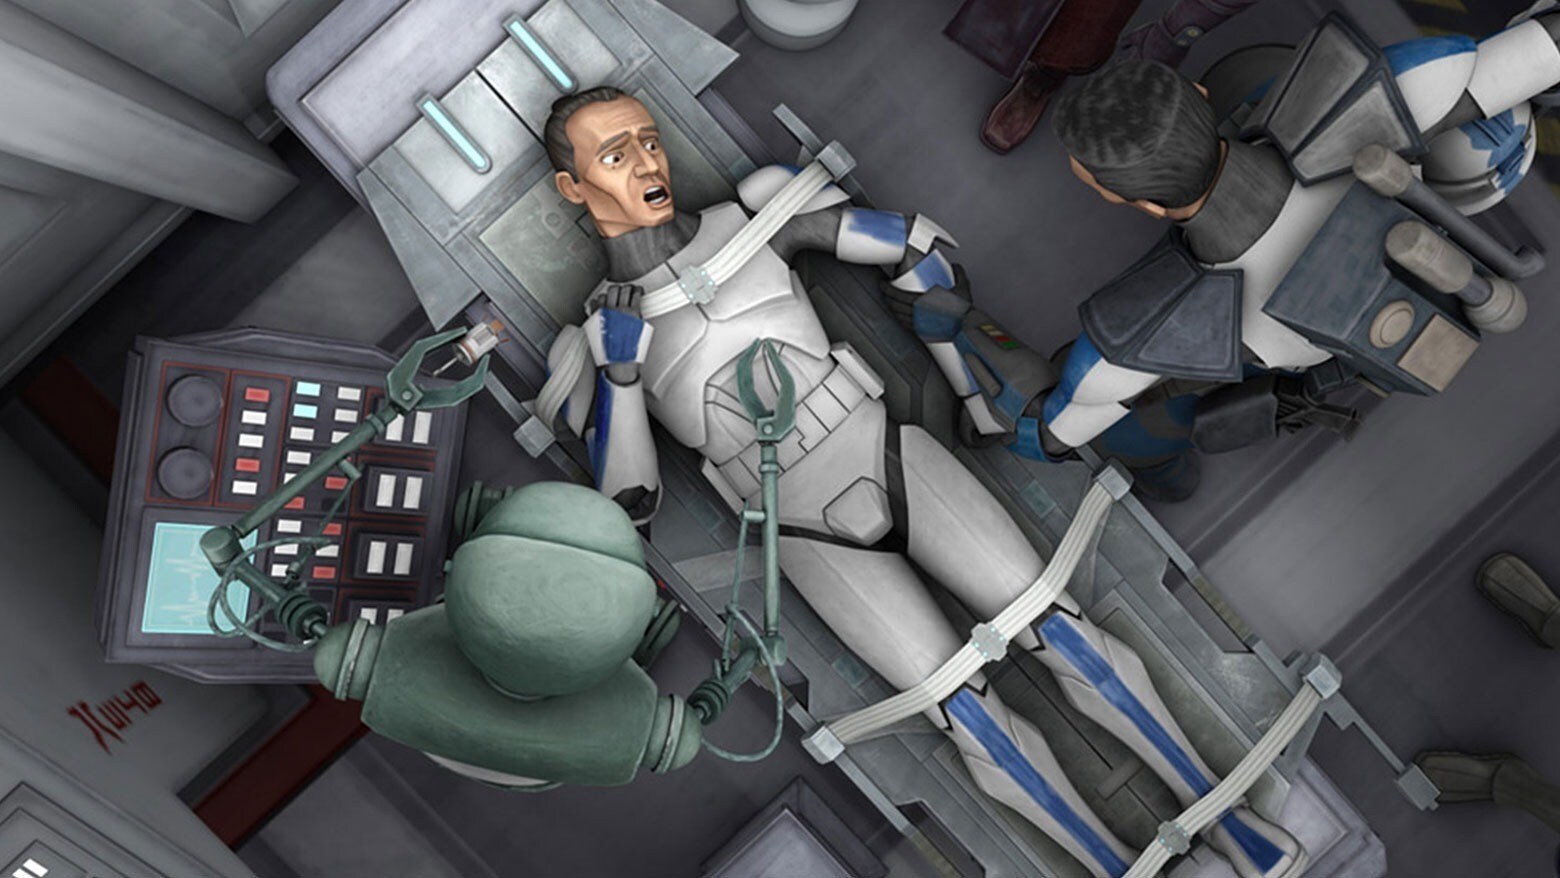 Clone trooper Tup strapped to hospital bed with medic standing over him